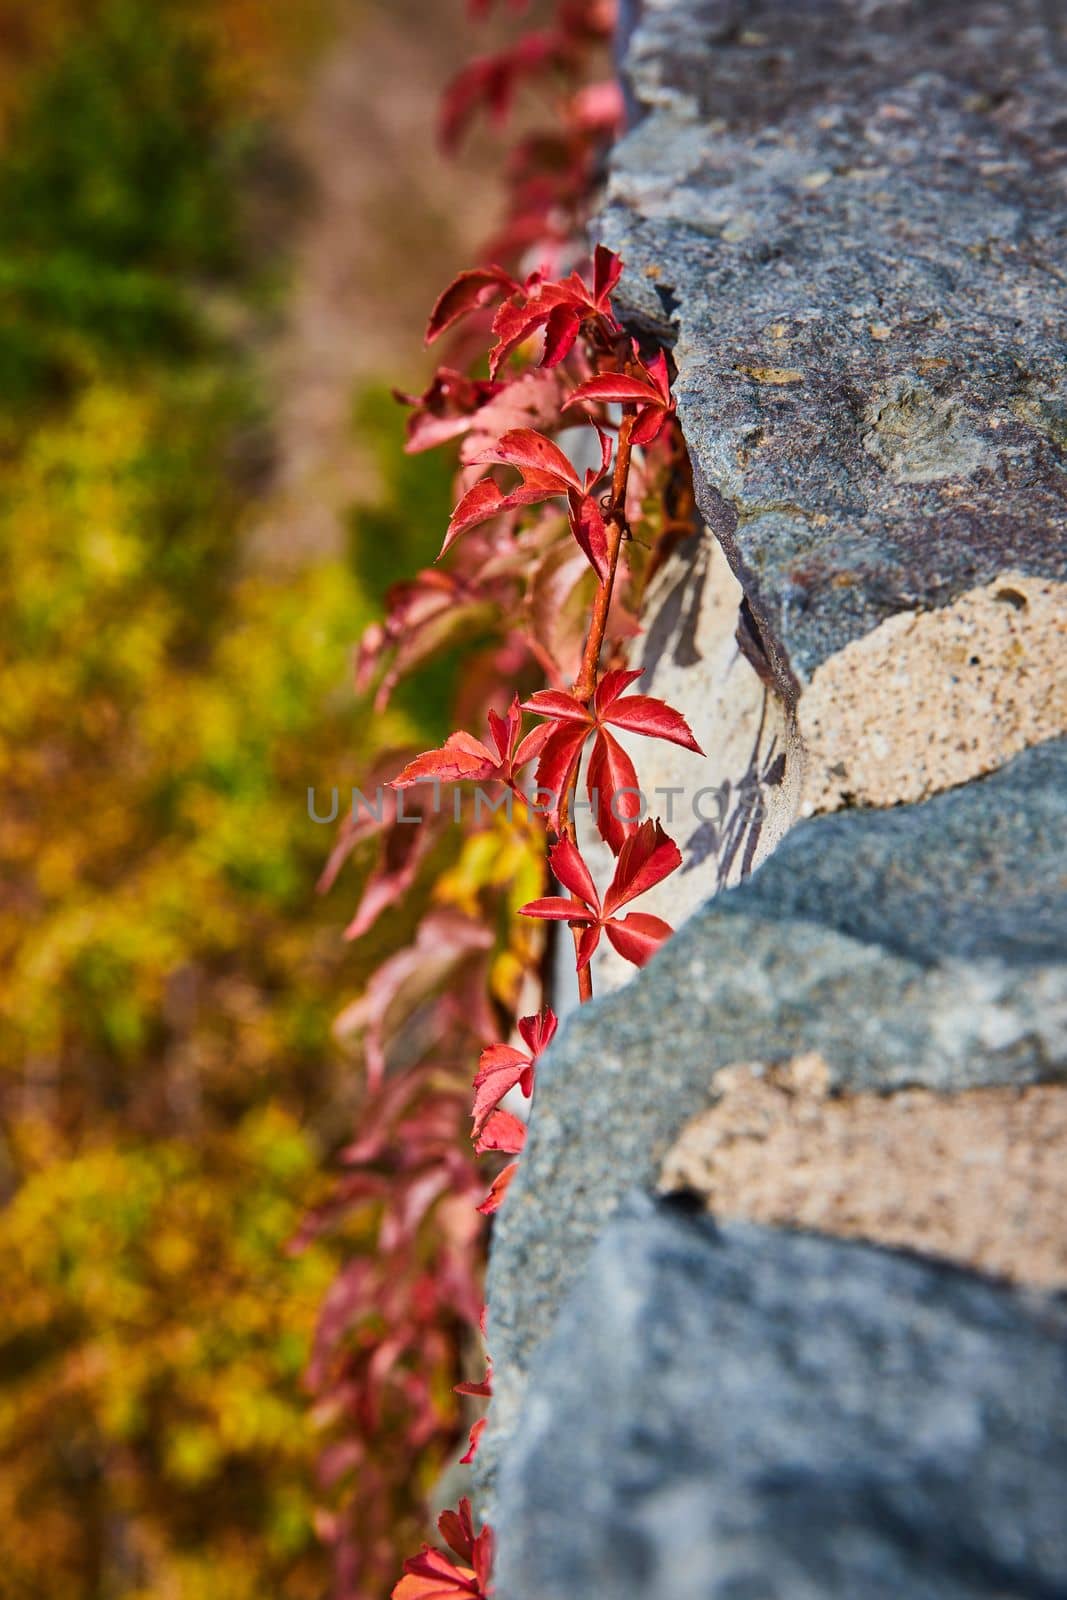 Detail of red leafed vines clinging onto stone wall with soft colorful brush behind by njproductions